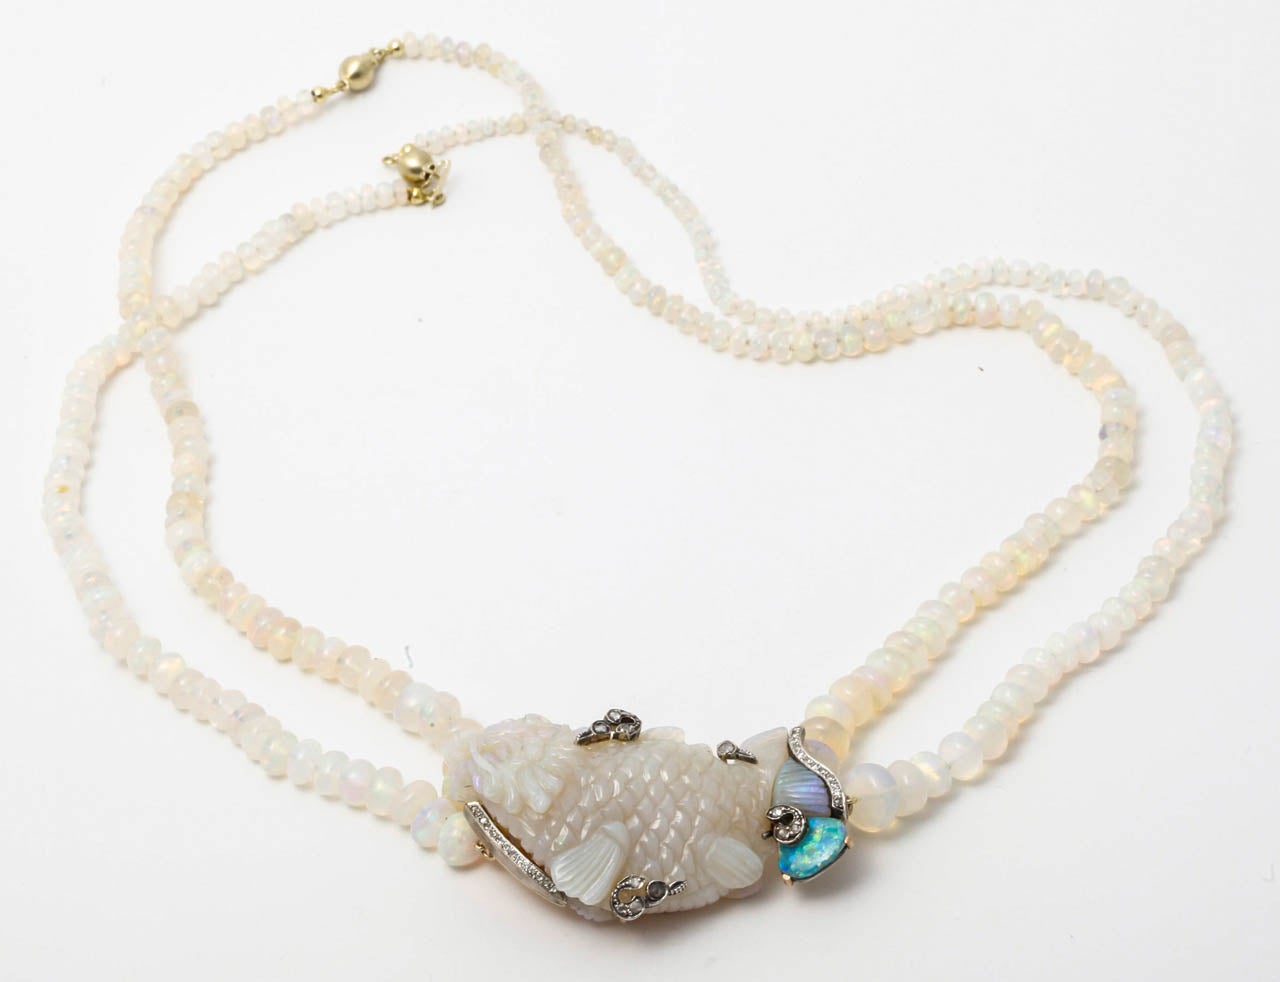 A double opal bead necklace centrally set with an opal fish carving, surrounded by a golden framework set with diamaonds.

All of our prices exclude VAT.